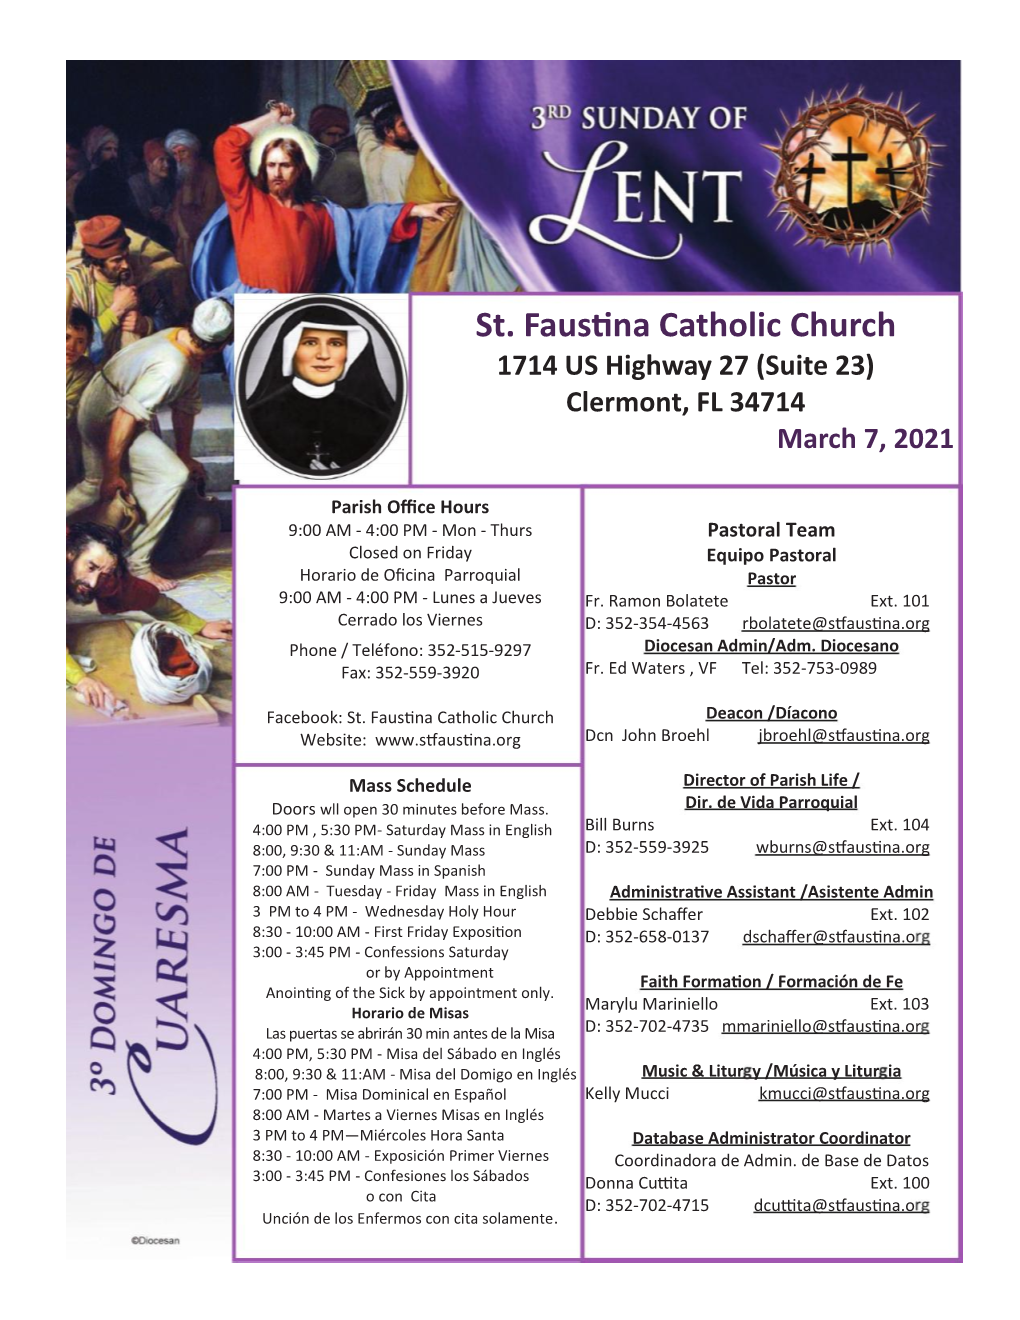 St. Faustina Catholic Church 1714 US Highway 27 (Suite 23) Clermont, FL 34714 March 7, 2021